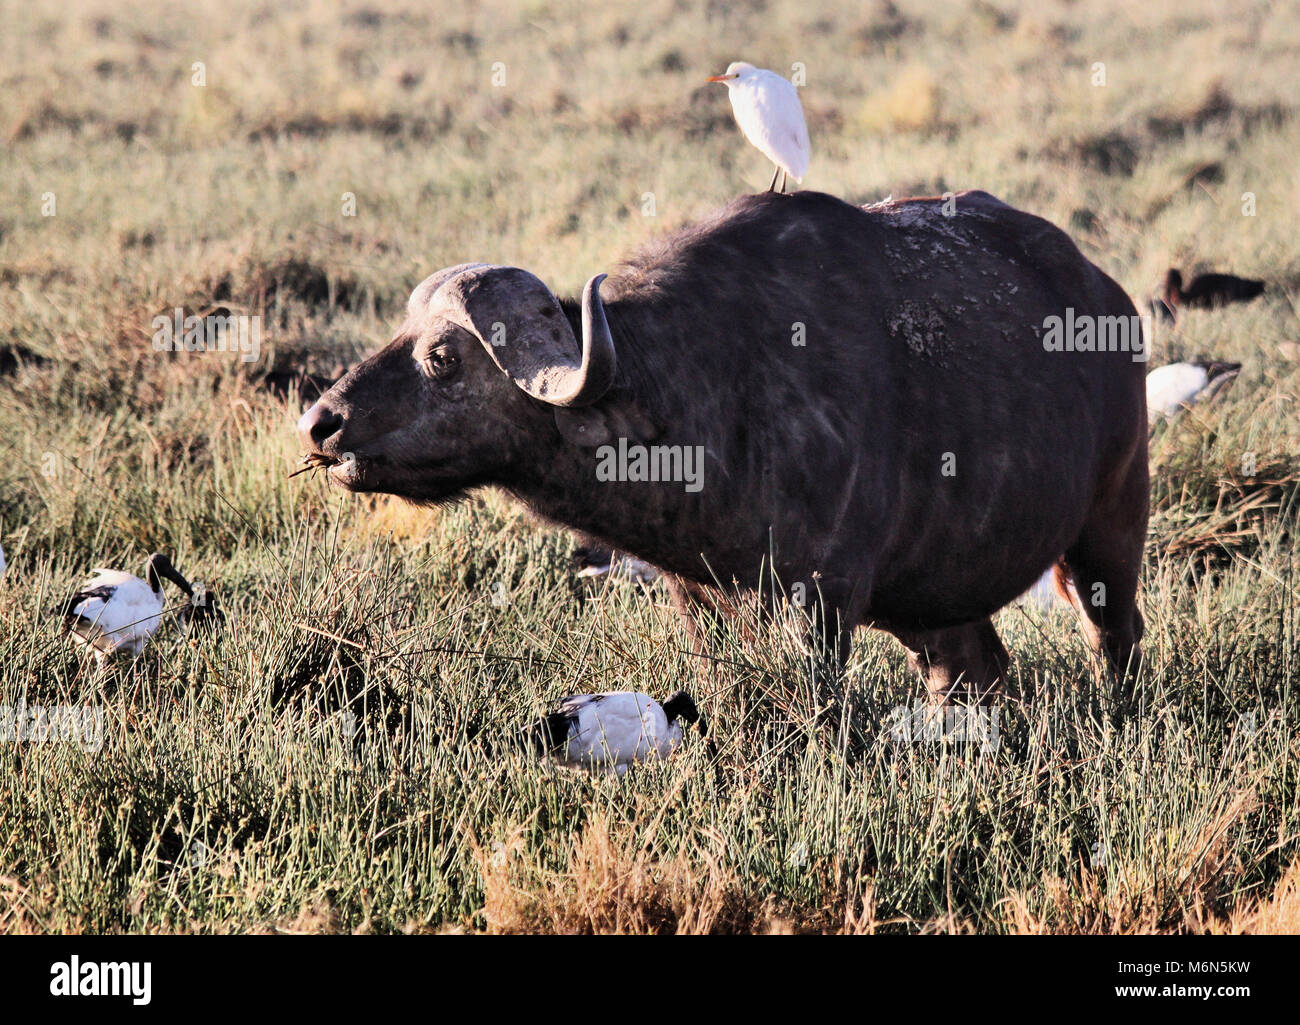 A Buffalo with a Cattle Egret on its back at Nakuru national park in Kenya Stock Photo